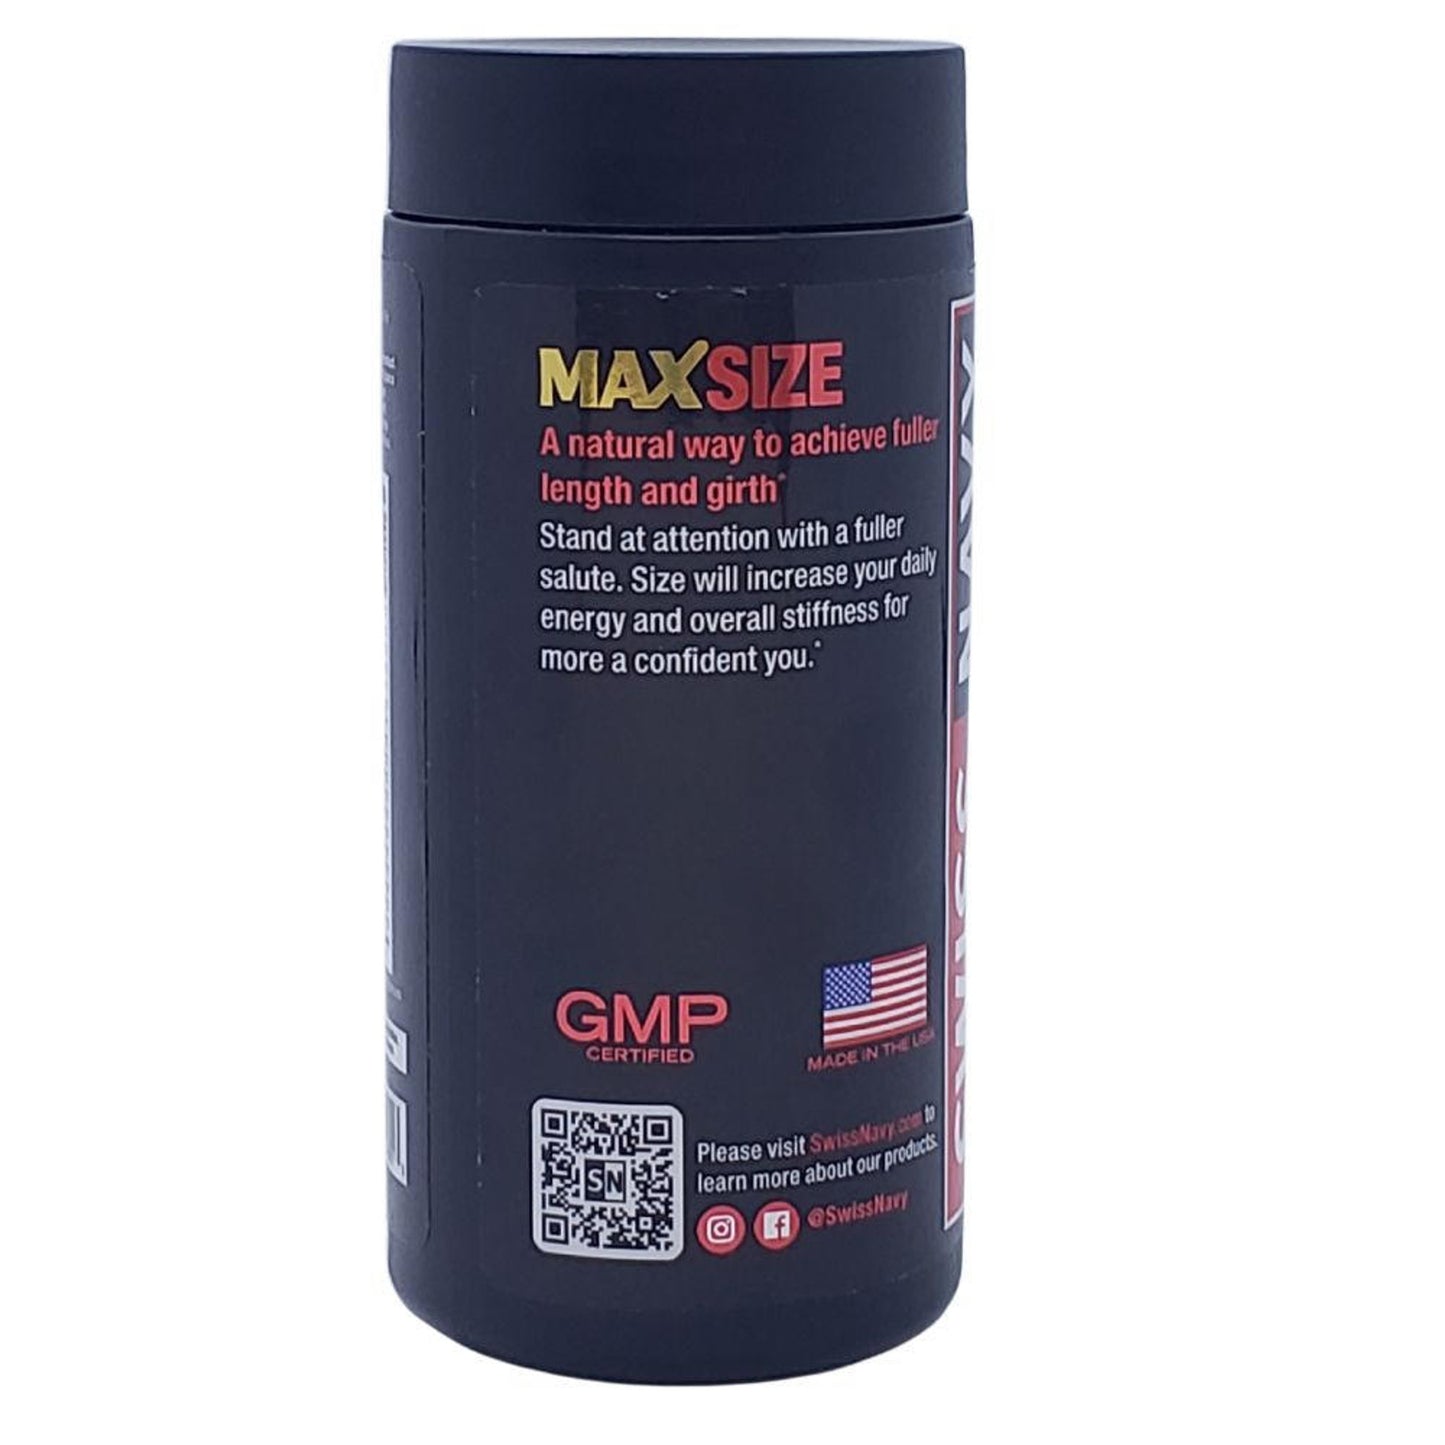 Swiss Navy Max Size - A1 Supplements Store